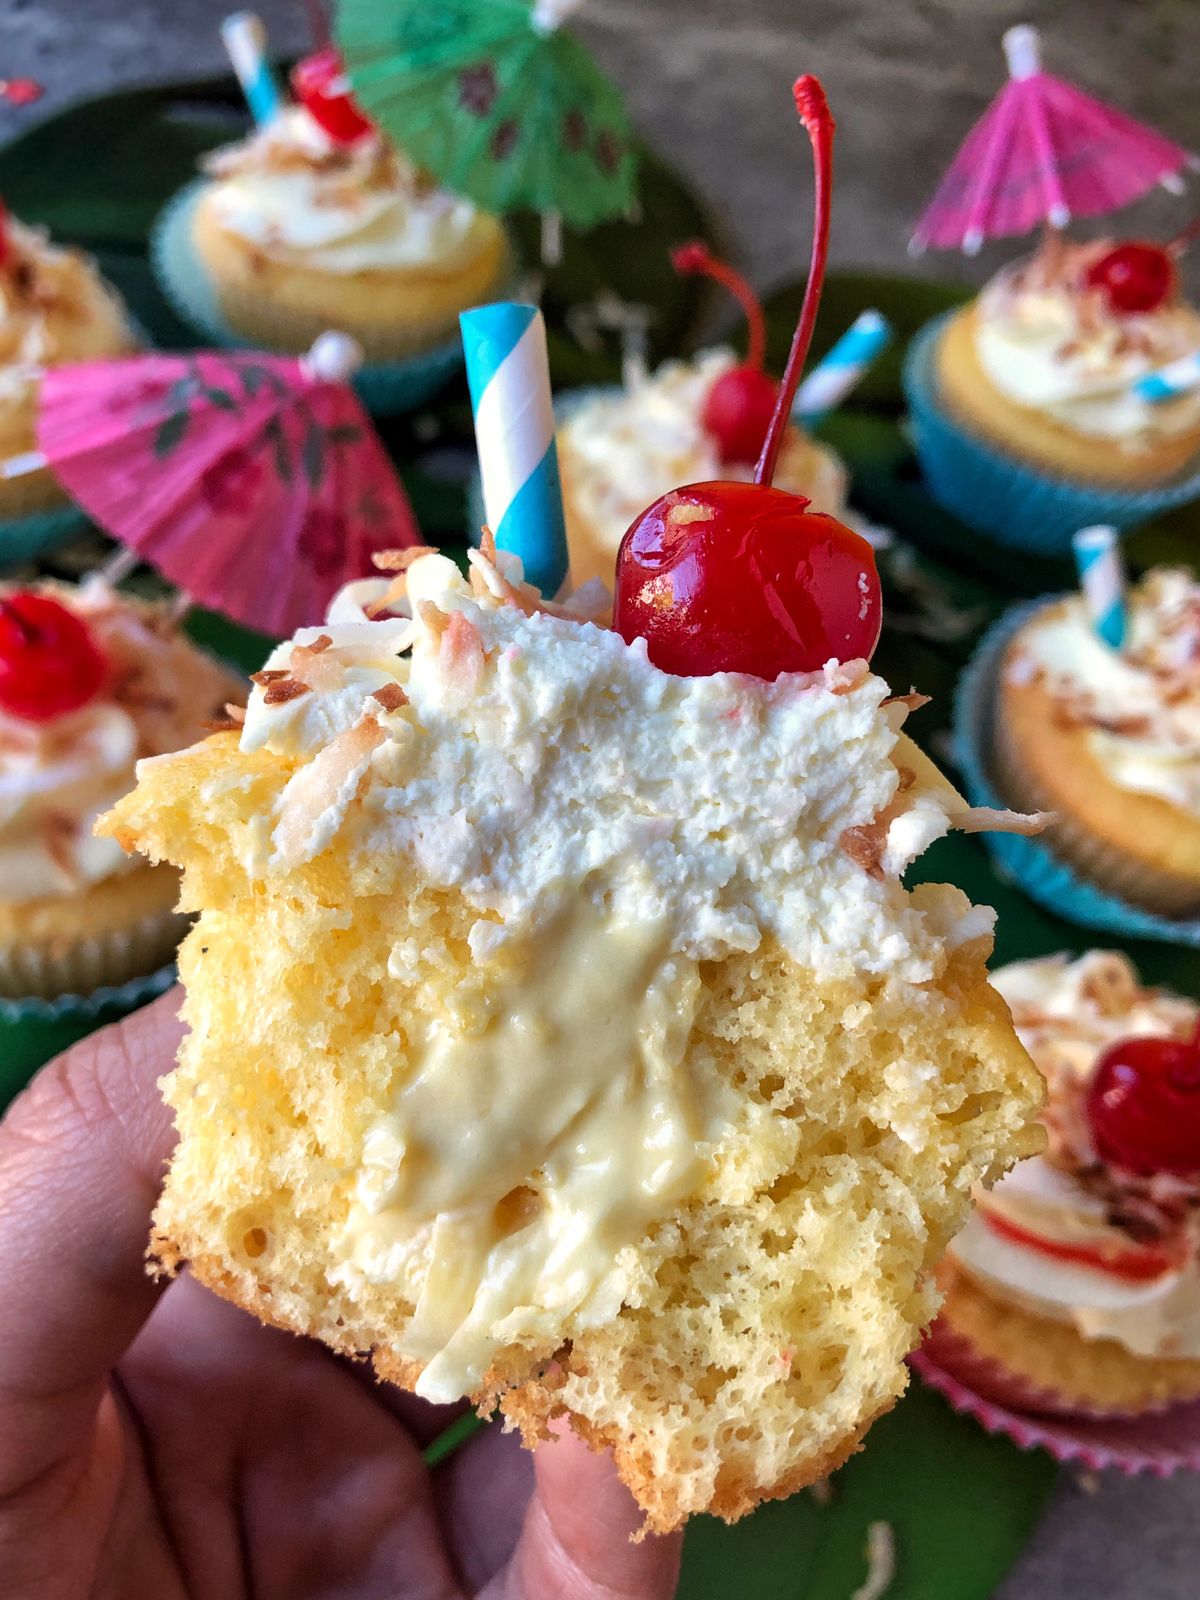 These piña colada cupcakes are topped off with a light and airy frosting.  (Audrey Alfaro/For The Spokesman-Review)